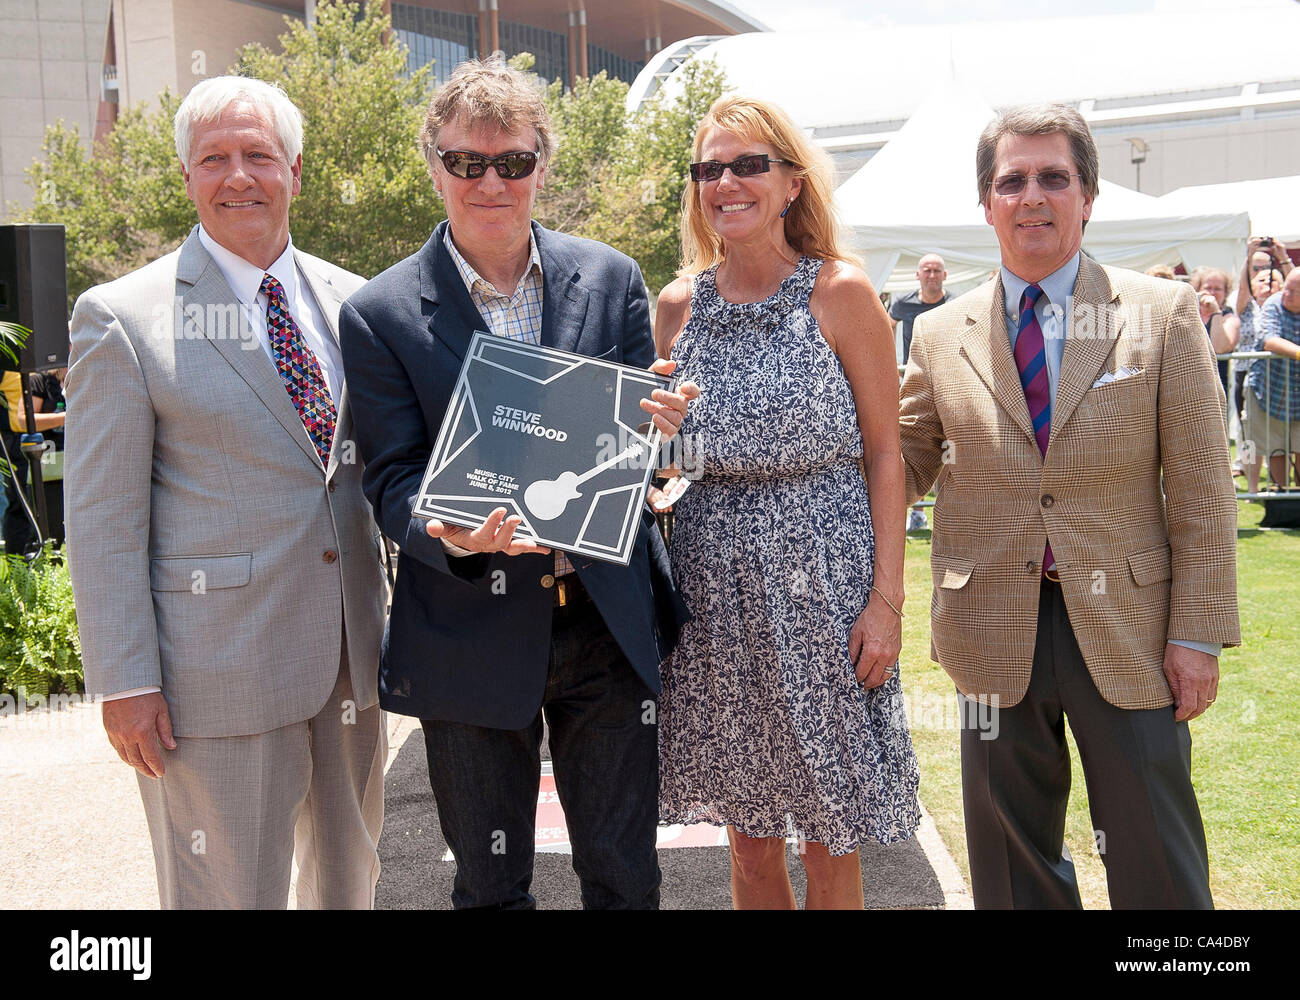 Jun 5, 2012 - Nashville, Tennessee; USA - (L-R) Dr. BOB FISHER Preseident of Belmont University, Musician STEVE WINWOOD,  EUGENIA WINWOOD and MARC STENGEL take part in the ceremony as Steve Winwood inducted into the Music City Walk of Fame that is located in Downtown Nashville.  Copyright 2012 Jason Stock Photo